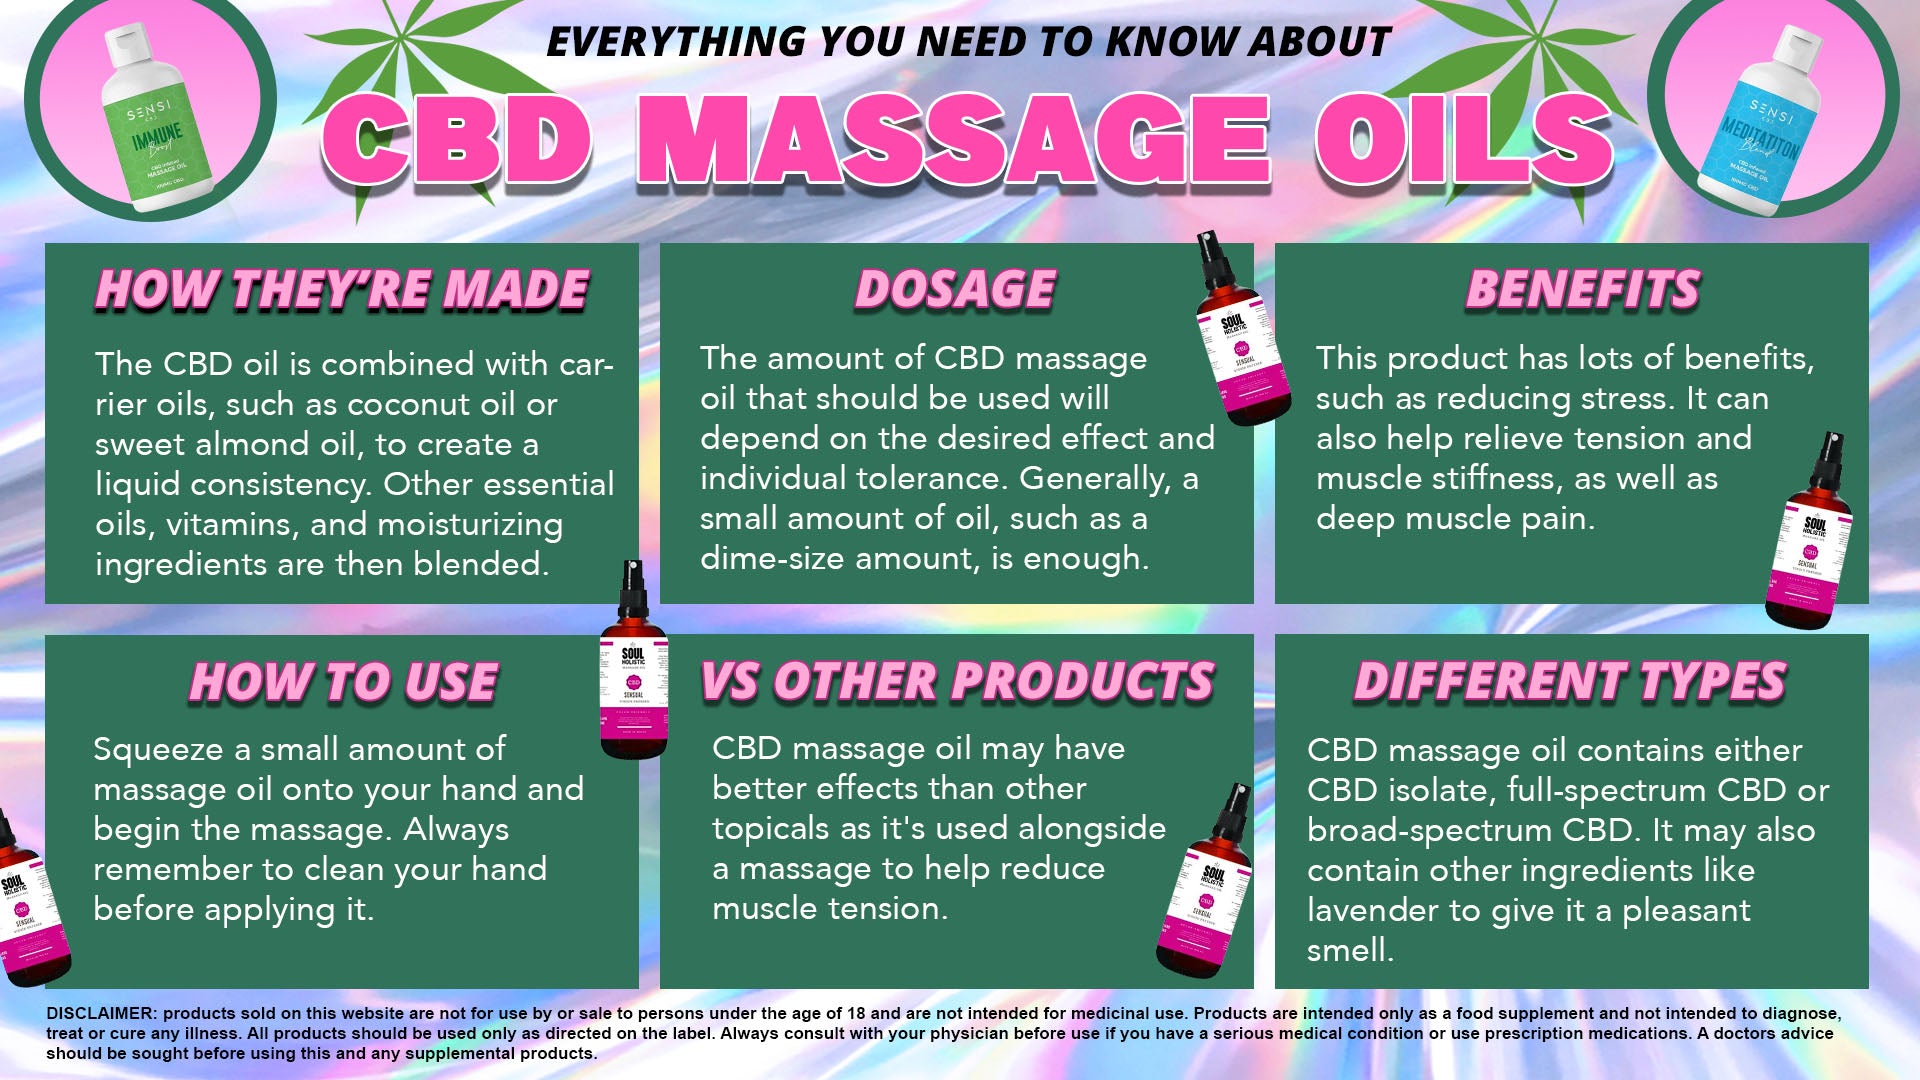 CBD Massage Oil and Sore Muscles